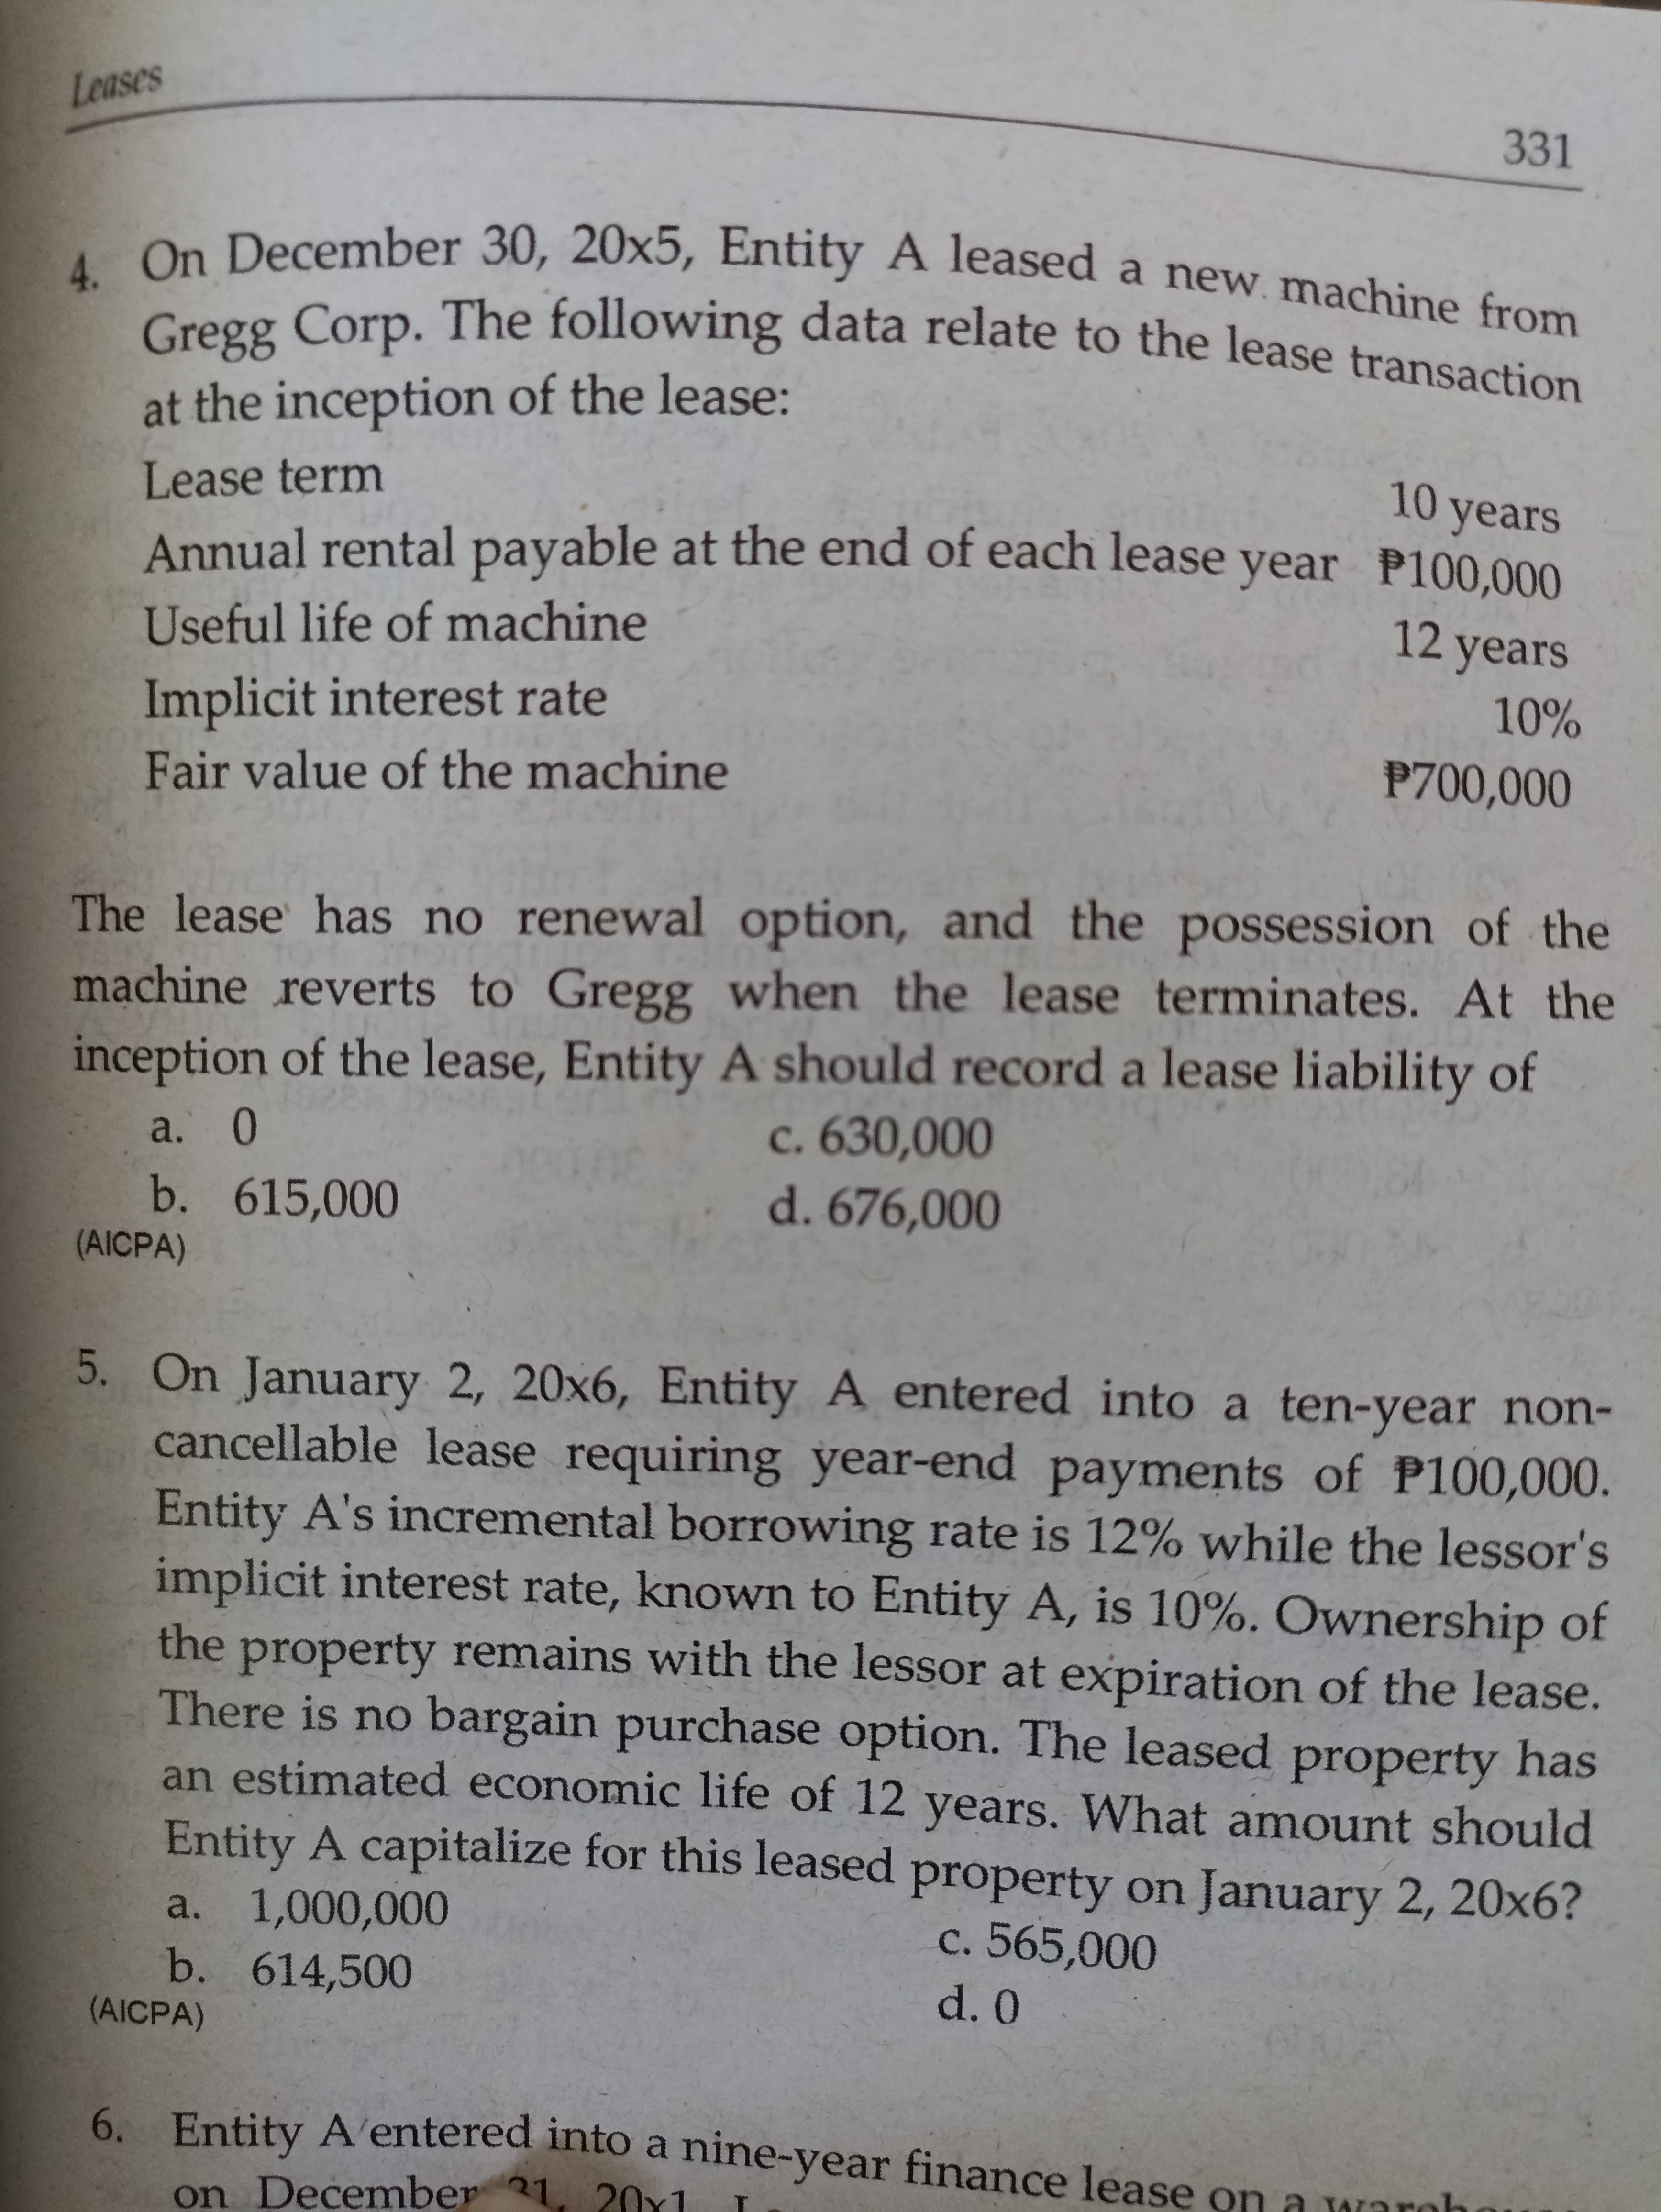 Leases
331
December 30, 20x5, Entity A leased a new. machine from
Cregg Corp. The following data relate to the lease transaction
at the inception of the lease:
Lease term
10 years
Annual rental payable at the end of each lease year P100,000
12 years
Useful life of machine
10%
Implicit interest rate
Fair value of the machine
P700,000
The lease has no renewal option, and the possession of the
machine reverts to Gregg when the lease terminates. At the
inception of the lease, Entity A should record a lease liability of
c. 630,000
d. 676,000
a. 0
b. 615,000
(AICPA)
5. On January 2, 20x6, Entity A entered into a ten-year non-
cancellable lease requiring year-end payments of P100,000.
Entity A's incremental borrowing rate is 12% while the lessor's
implicit interest rate, known to Entity A, is 10%. Ownership of
the property remains with the lessor at expiration of the lease.
There is no bargain purchase option. The leased property has
an estimated economic life of 12 years. What amount should
Entity A capitalize for this leased property on January 2, 20x6?
a. 1,000,000
b. 614,500
(AICPA)
c. 565,000
d. 0
6. Entity A'entered into a nine-year finance lease
on .
December 31
